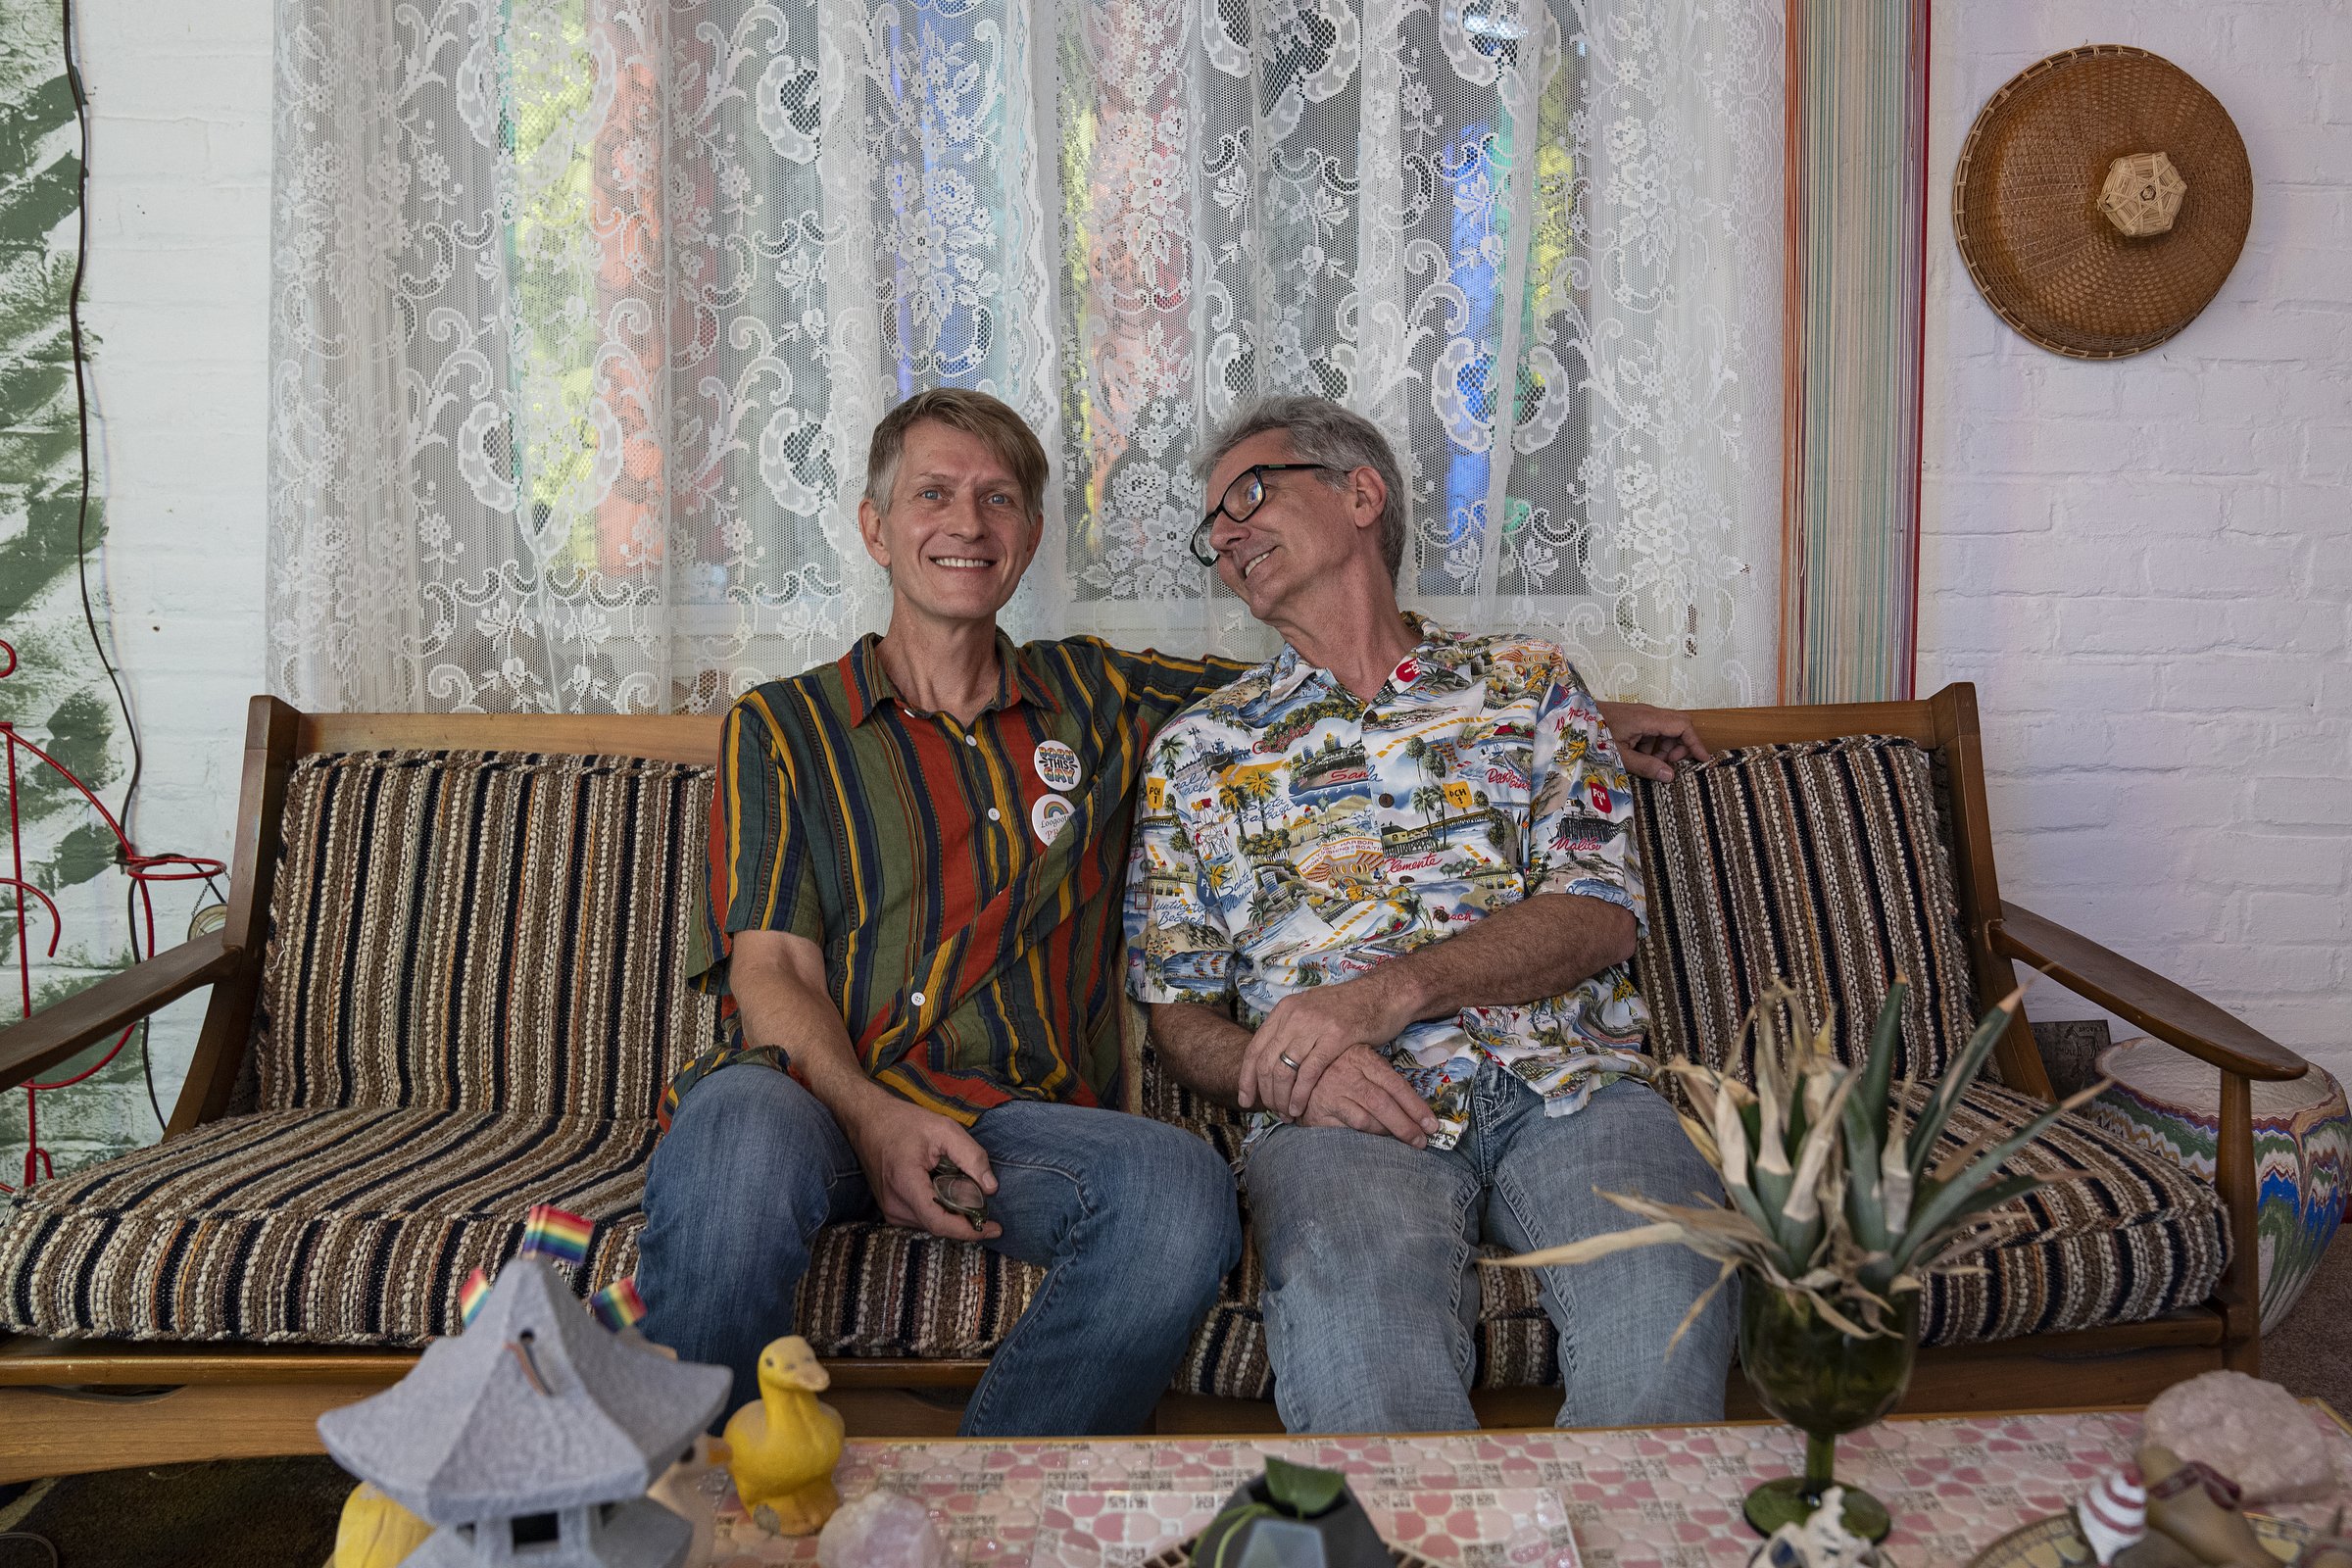  Tracy, 57, and Tim Brown-Salsman, 59, residents of Loogootee, Indiana, pose for a portrait at home on Thursday, July 14, 2022. The married couple has lived in Loogootee, which is Tim's hometown of about 2,500 people, since 1997. "It's the small comm